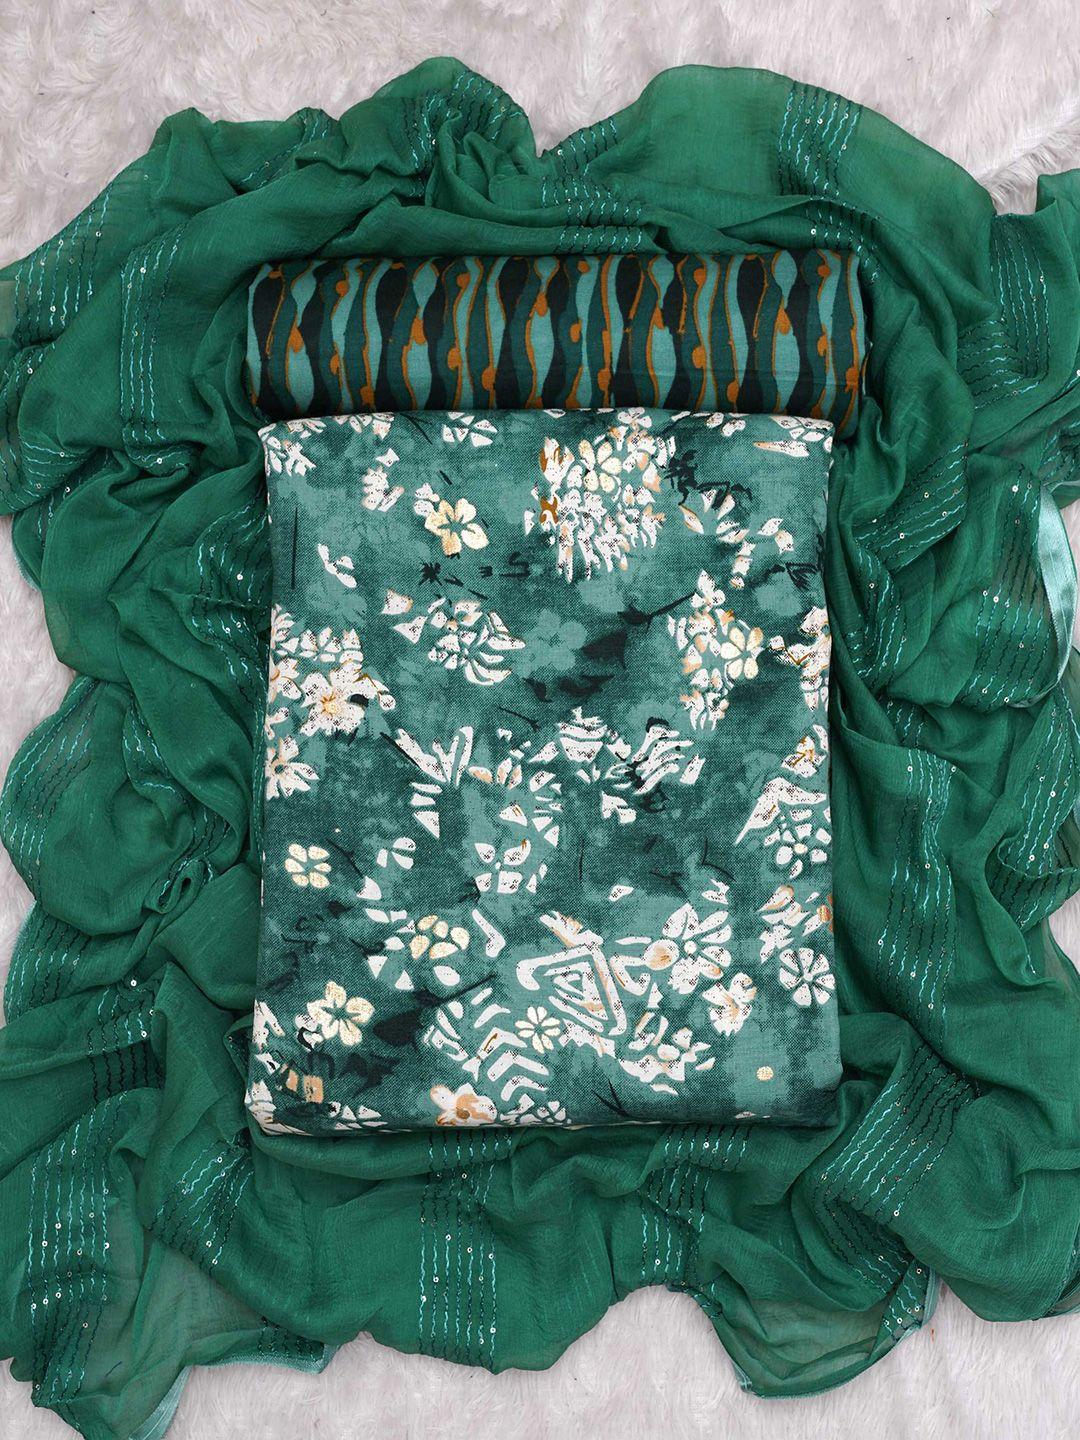 kalini teal & white printed art silk unstitched dress material